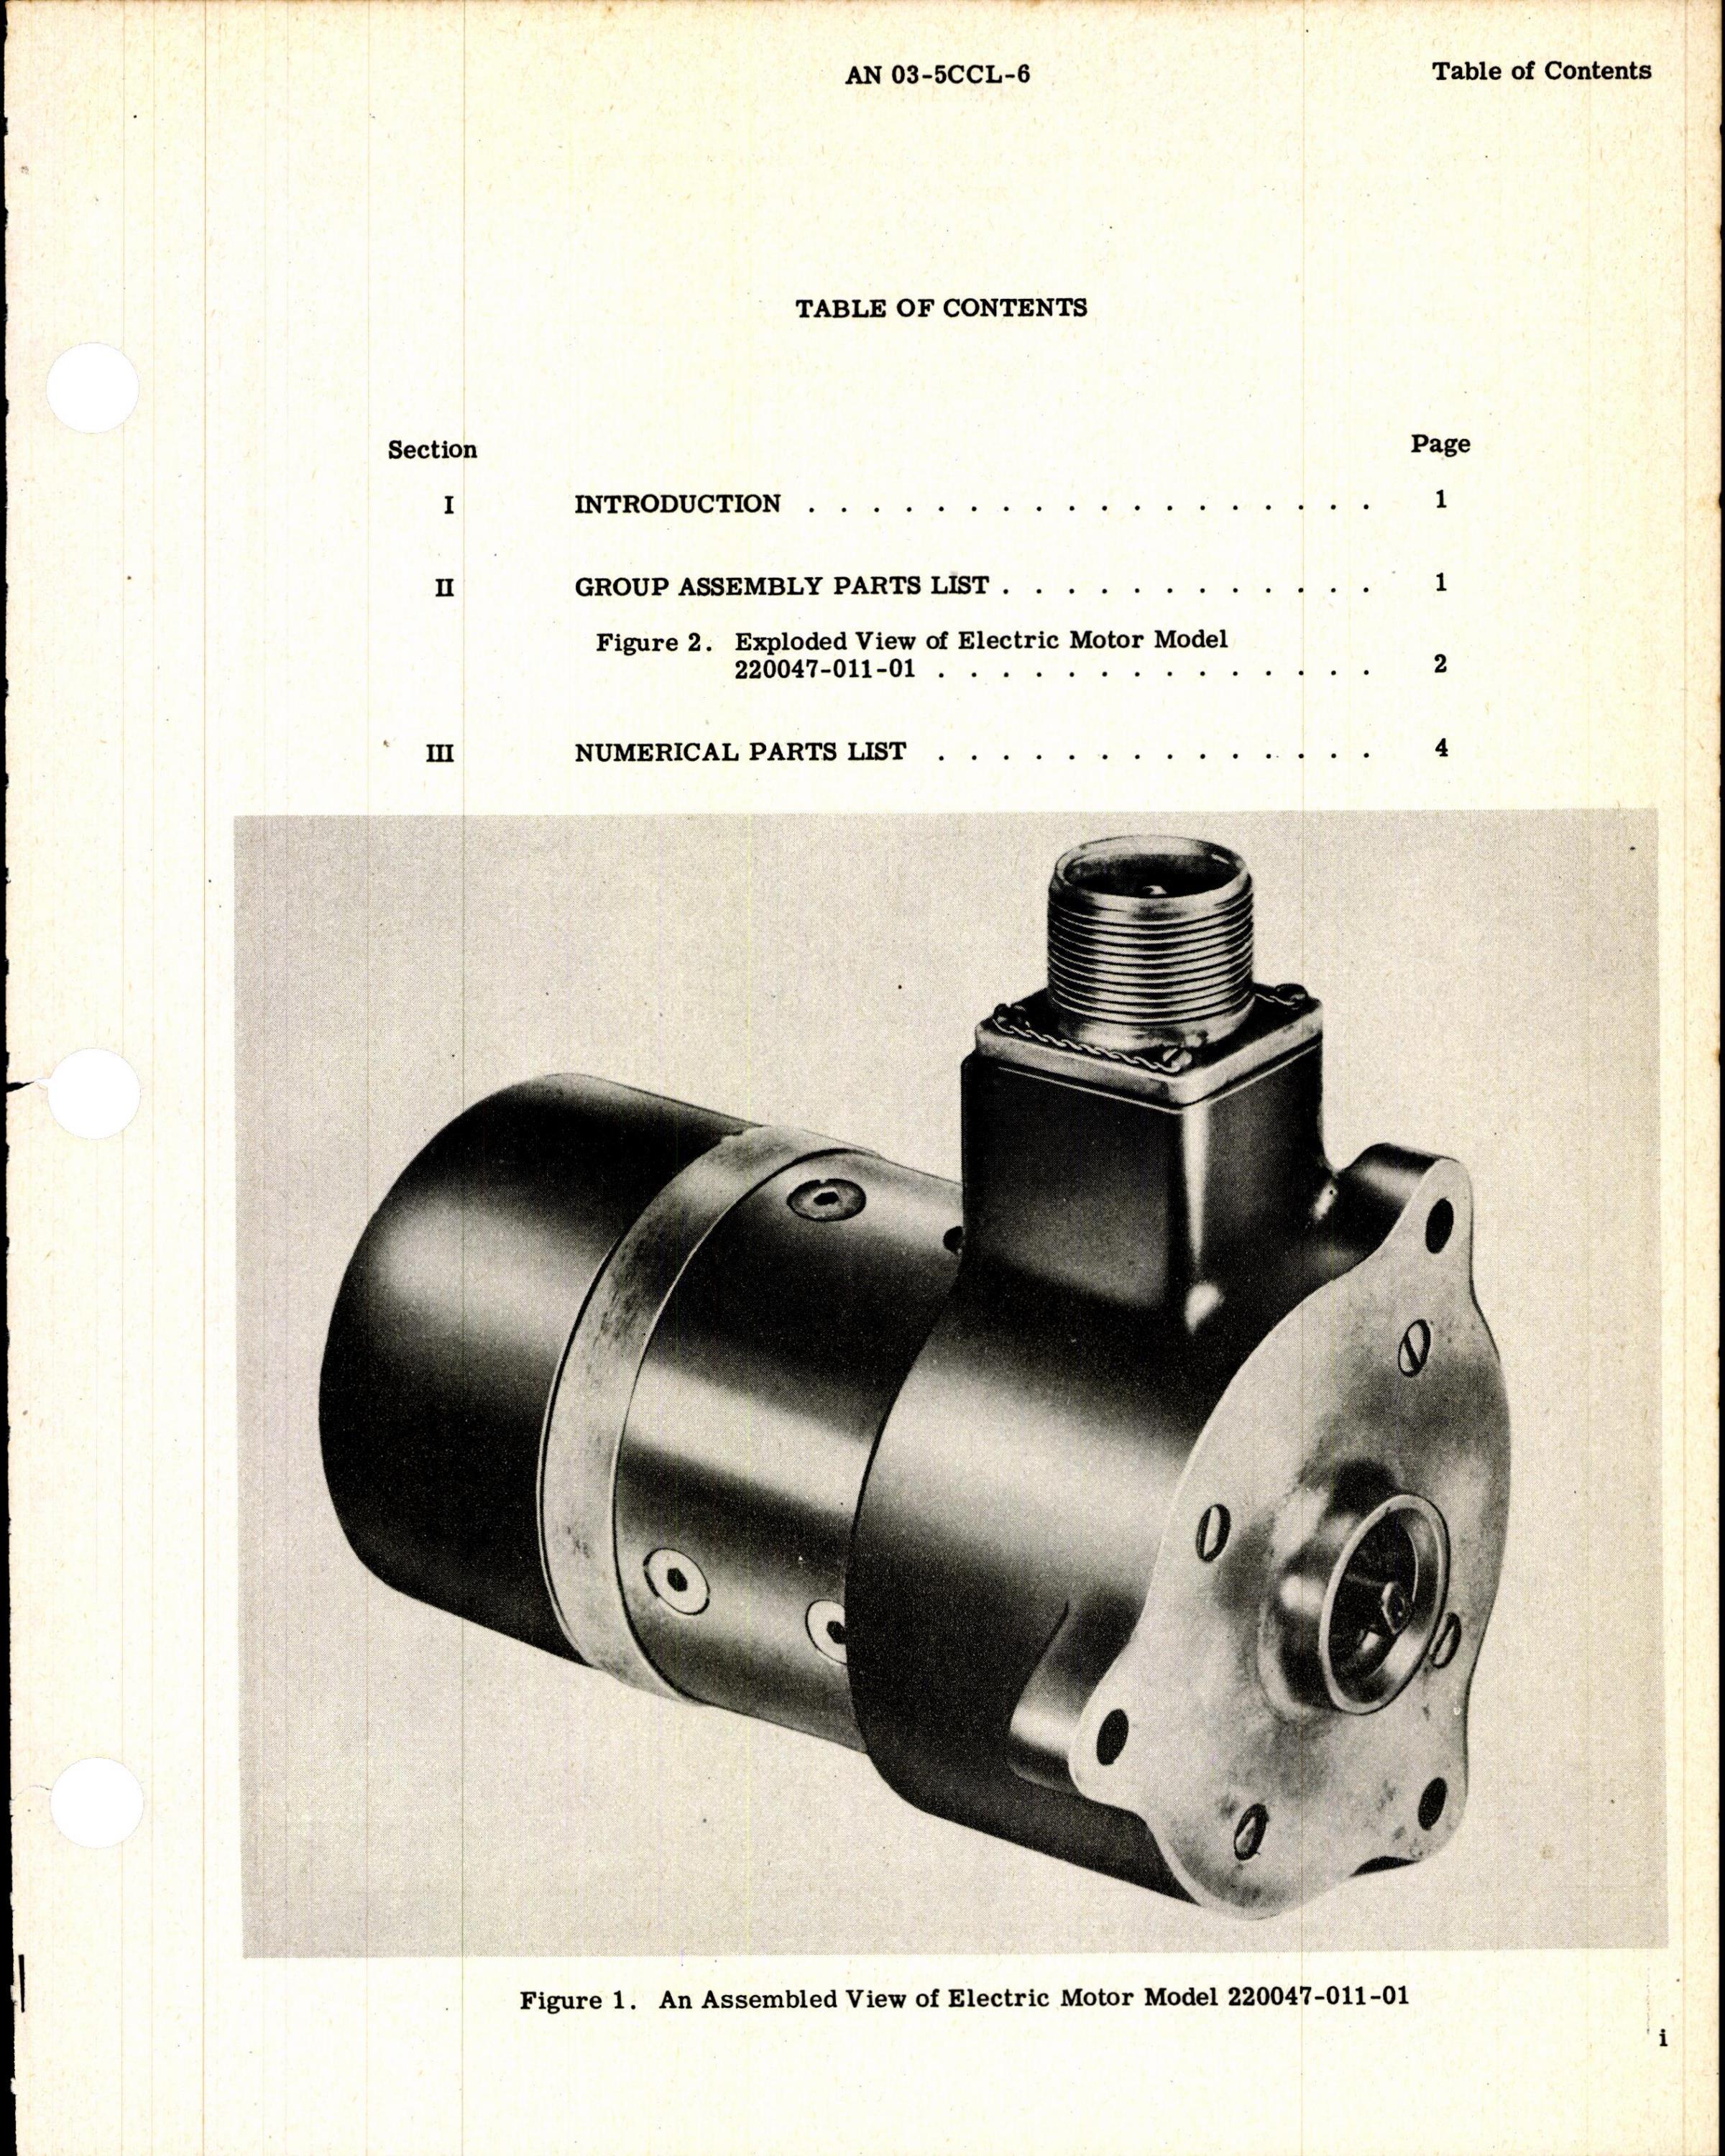 Sample page 3 from AirCorps Library document: Parts Catalog for Pesco Electric Motors, Model 220047-011-01